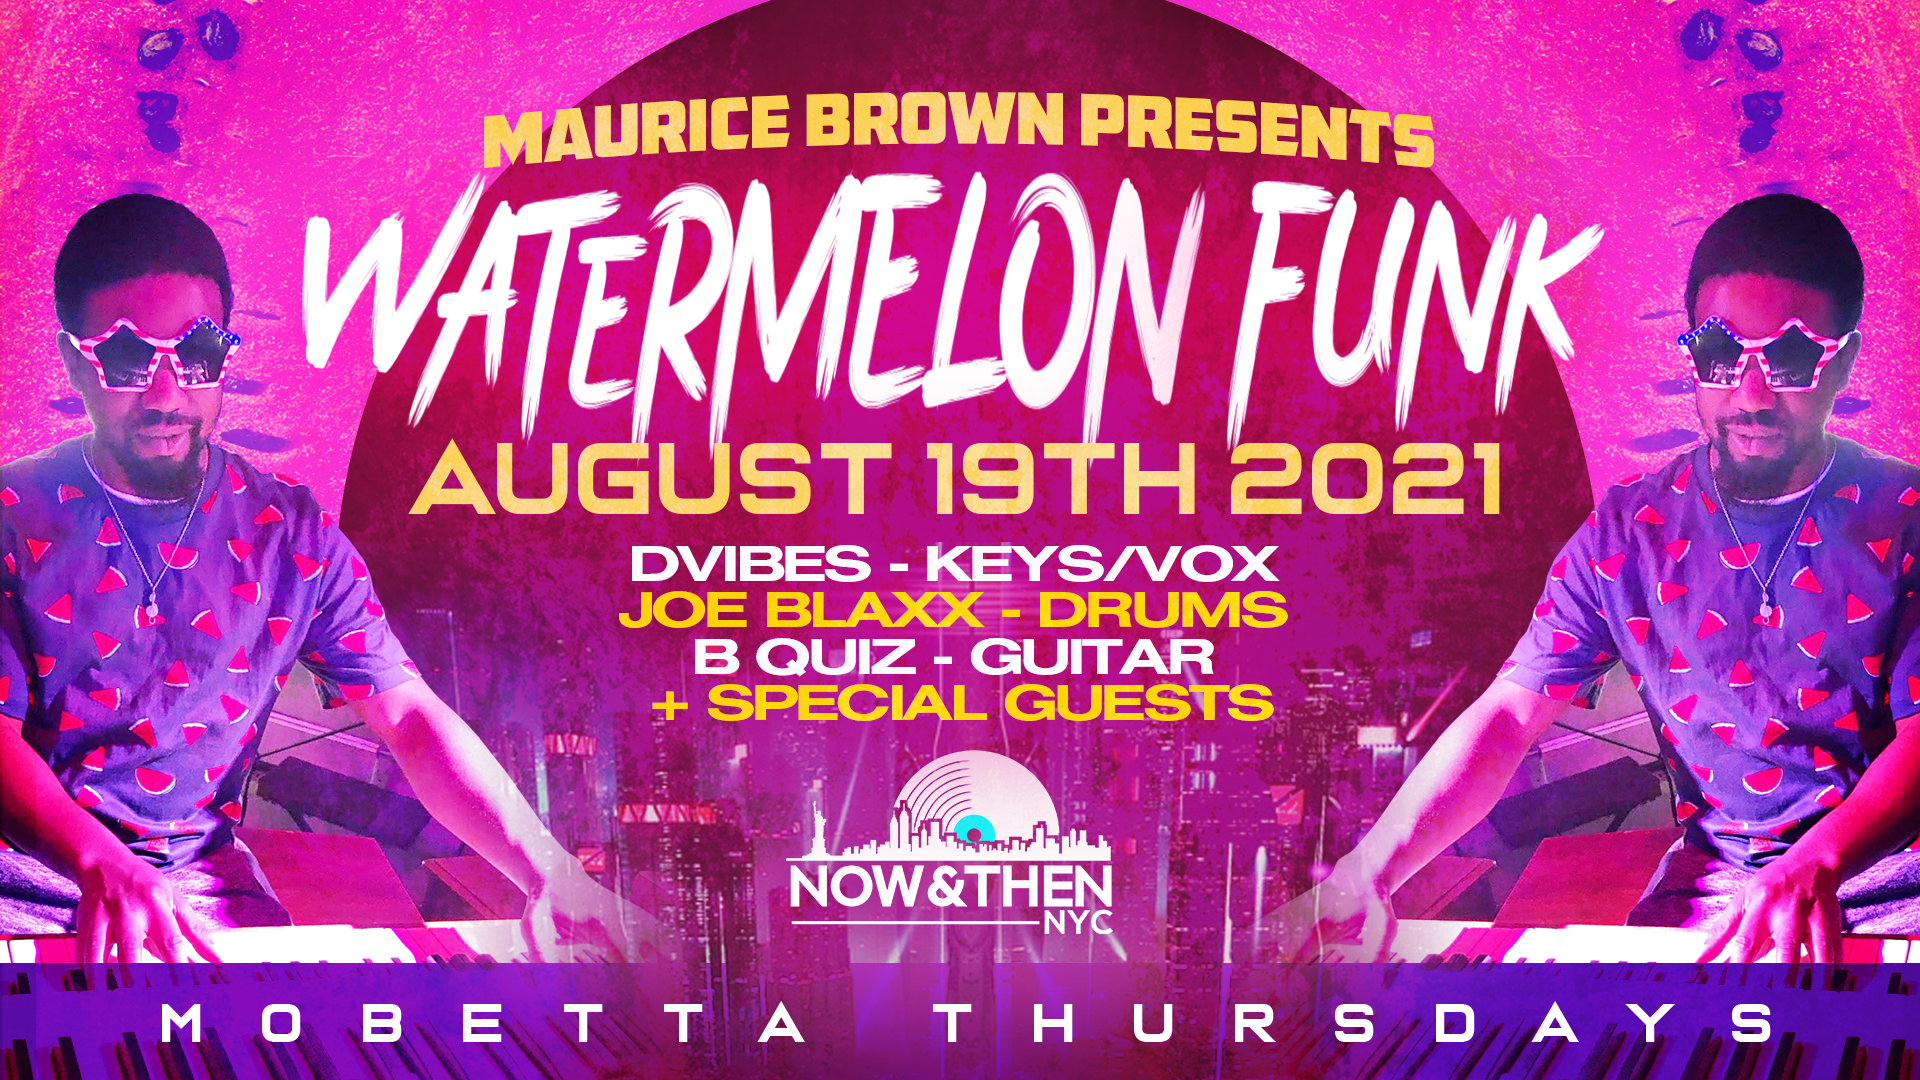 Photo for Mobetta Thursdays Curated By Maurice Brown Presents: Watermelon Funk  August 19th on ViewStub